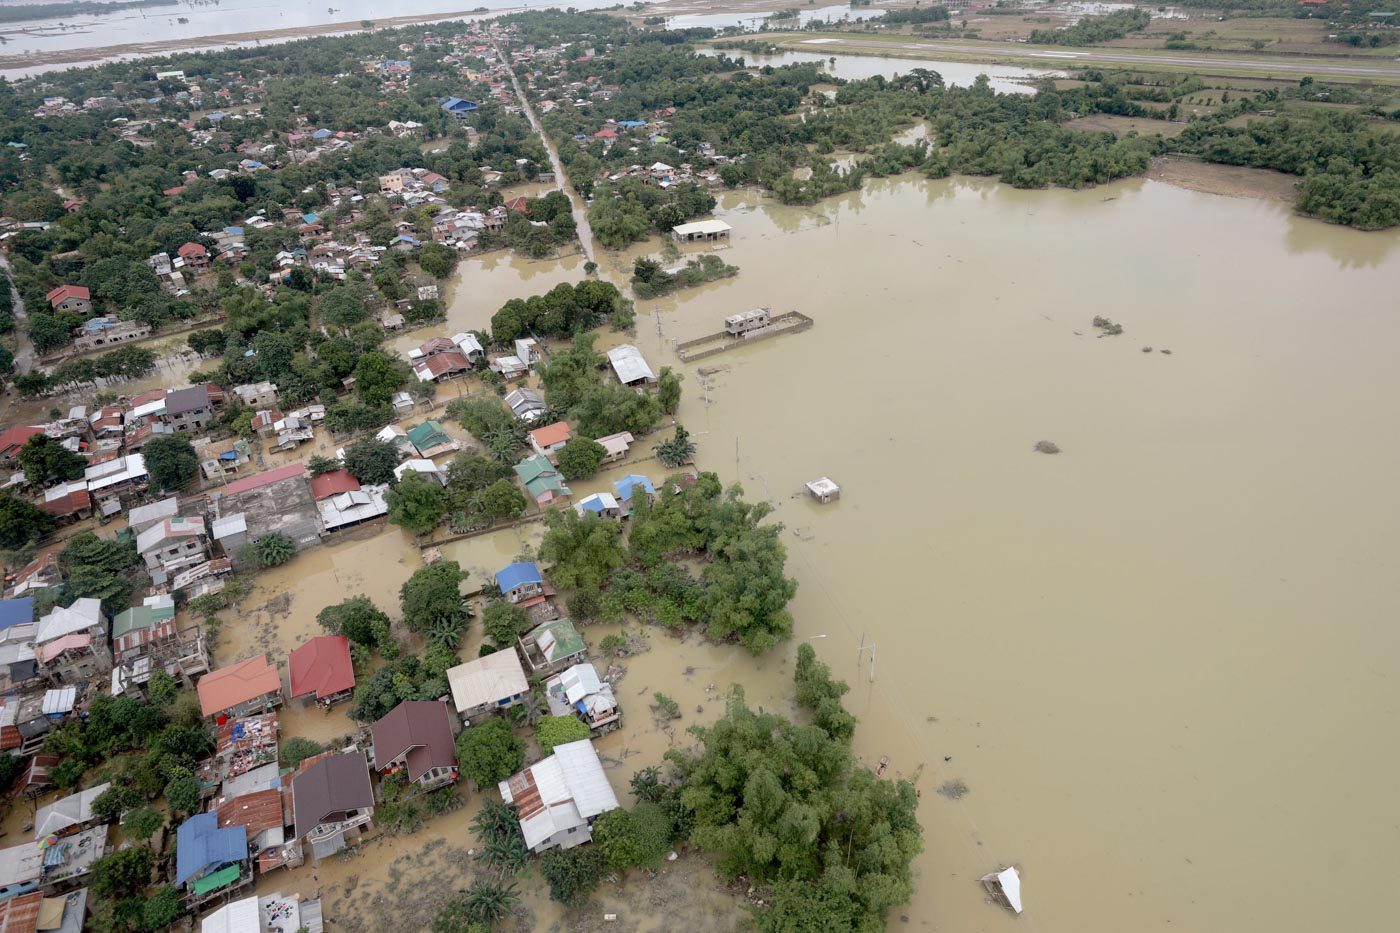 Senate, House to probe massive Luzon flooding from recent typhoons